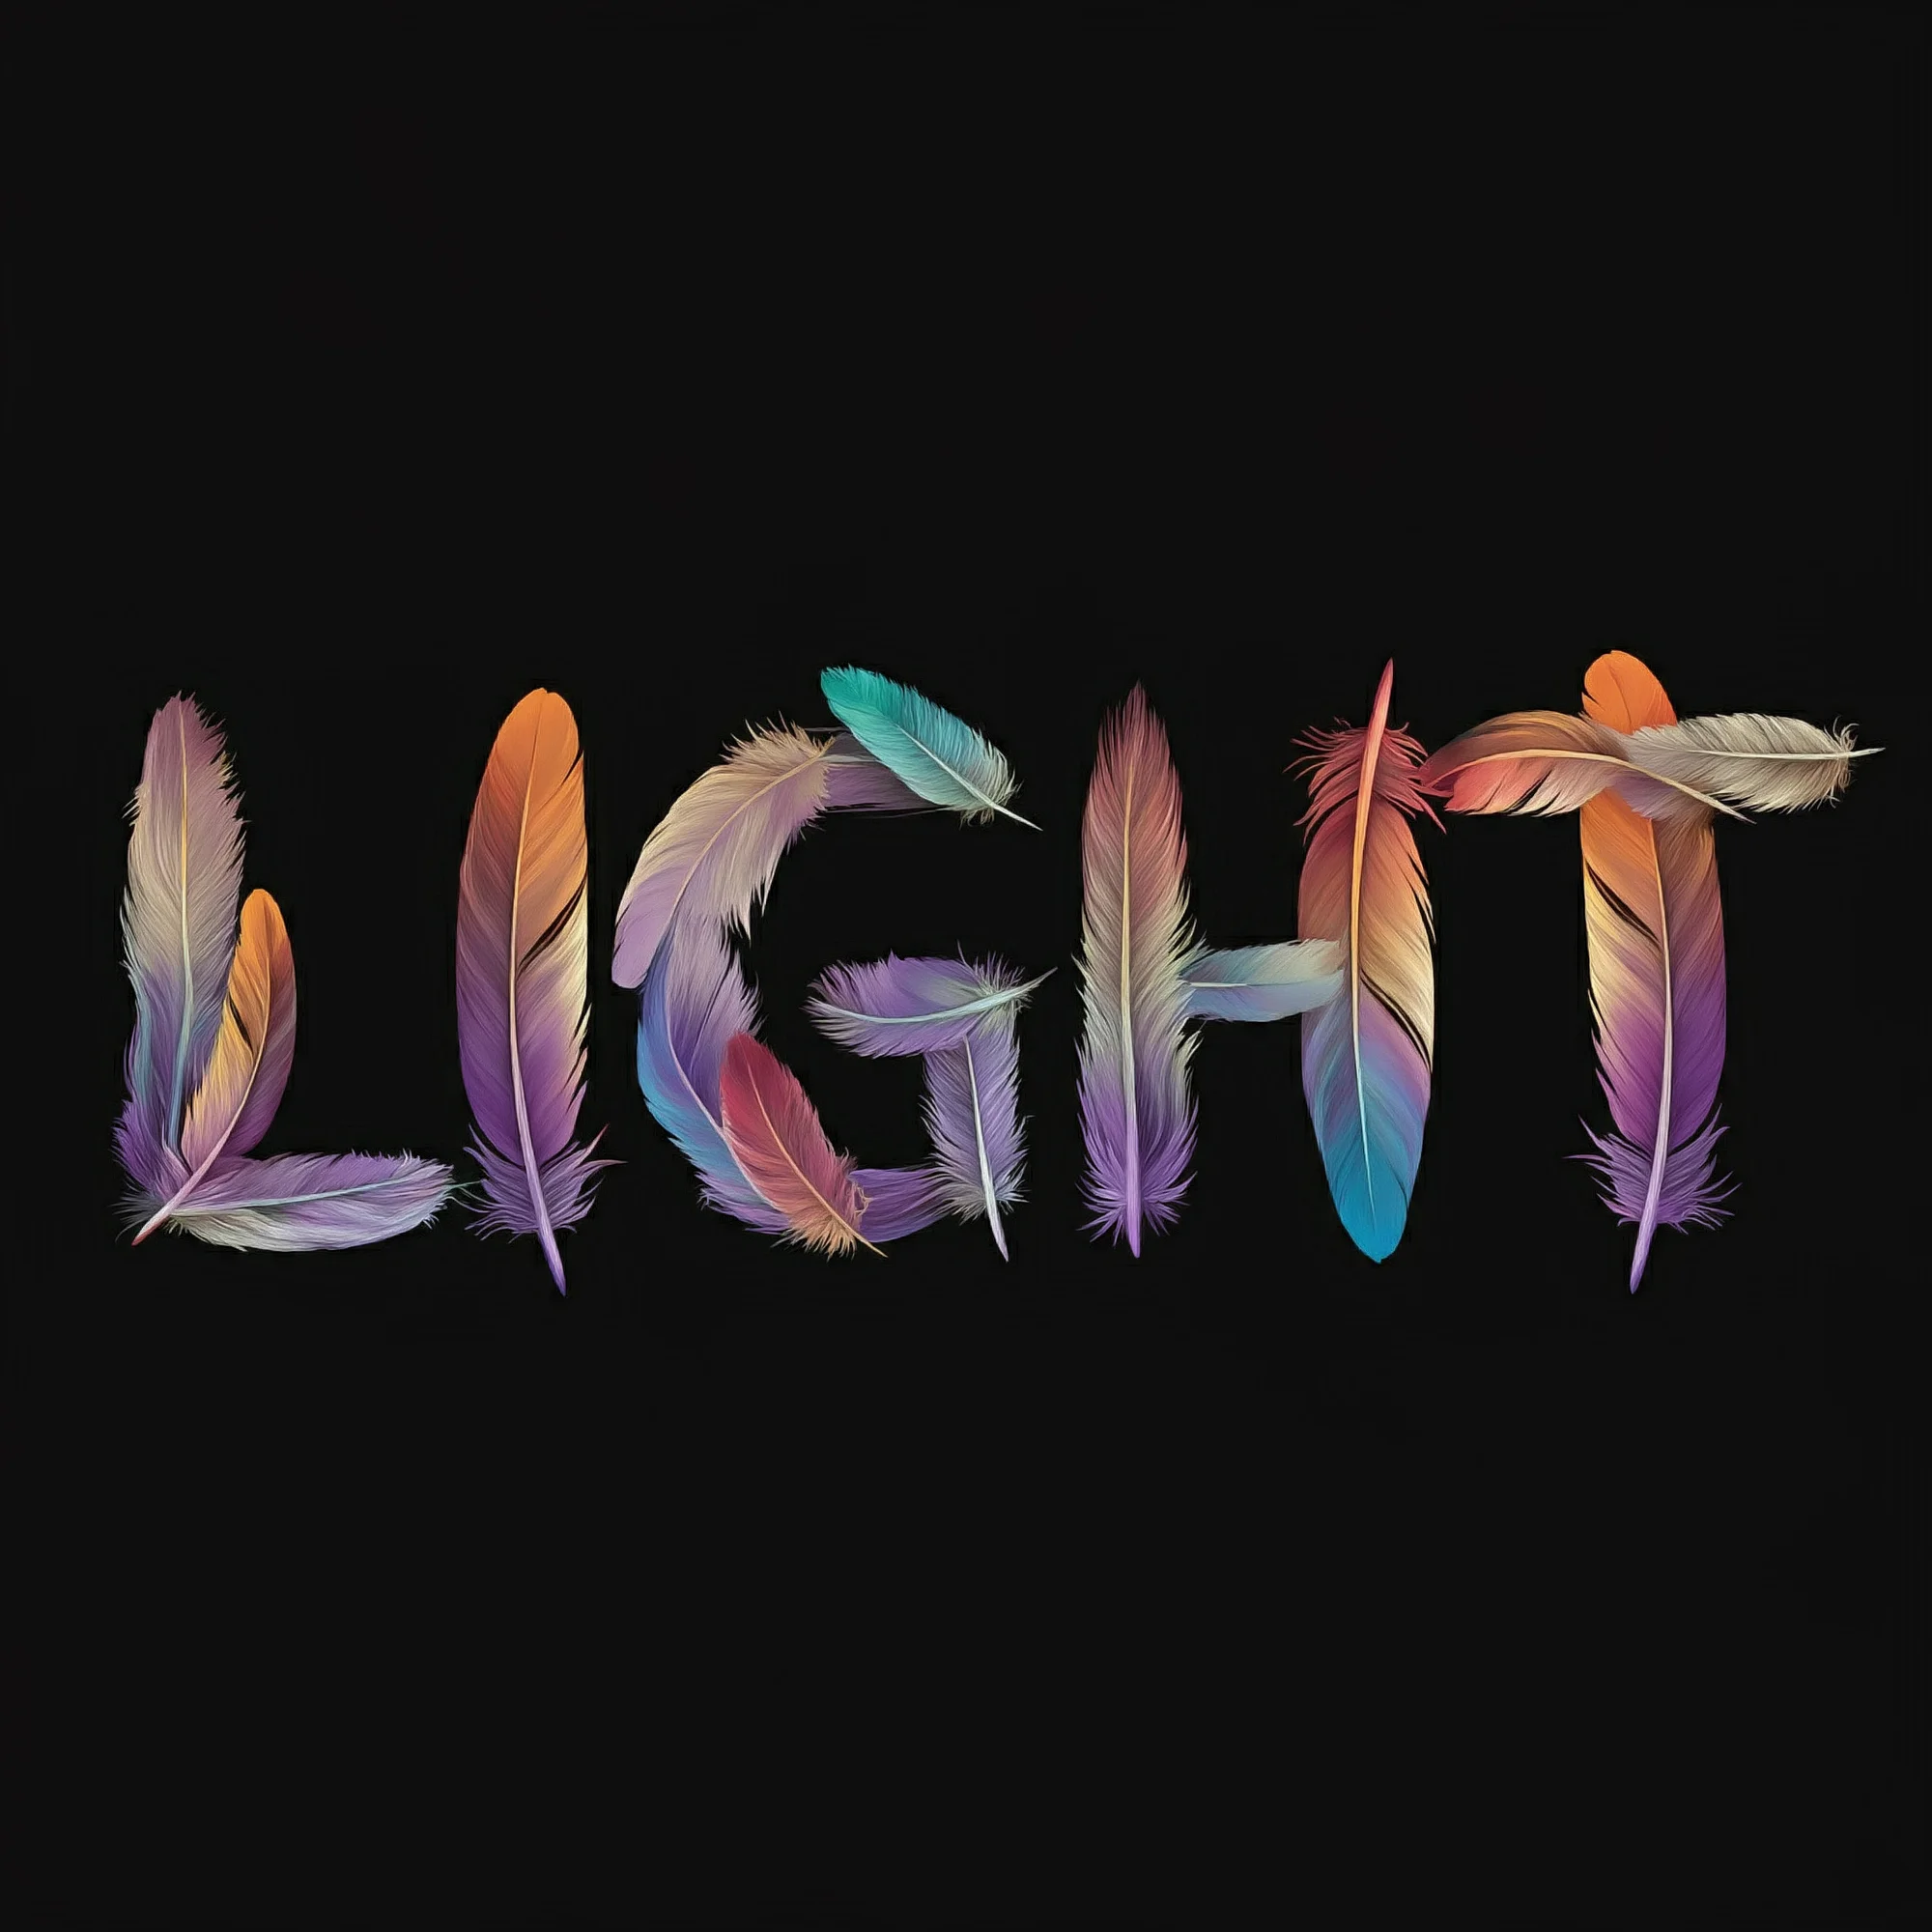 The word "light" formed from colorful feathers arranged on a black background.